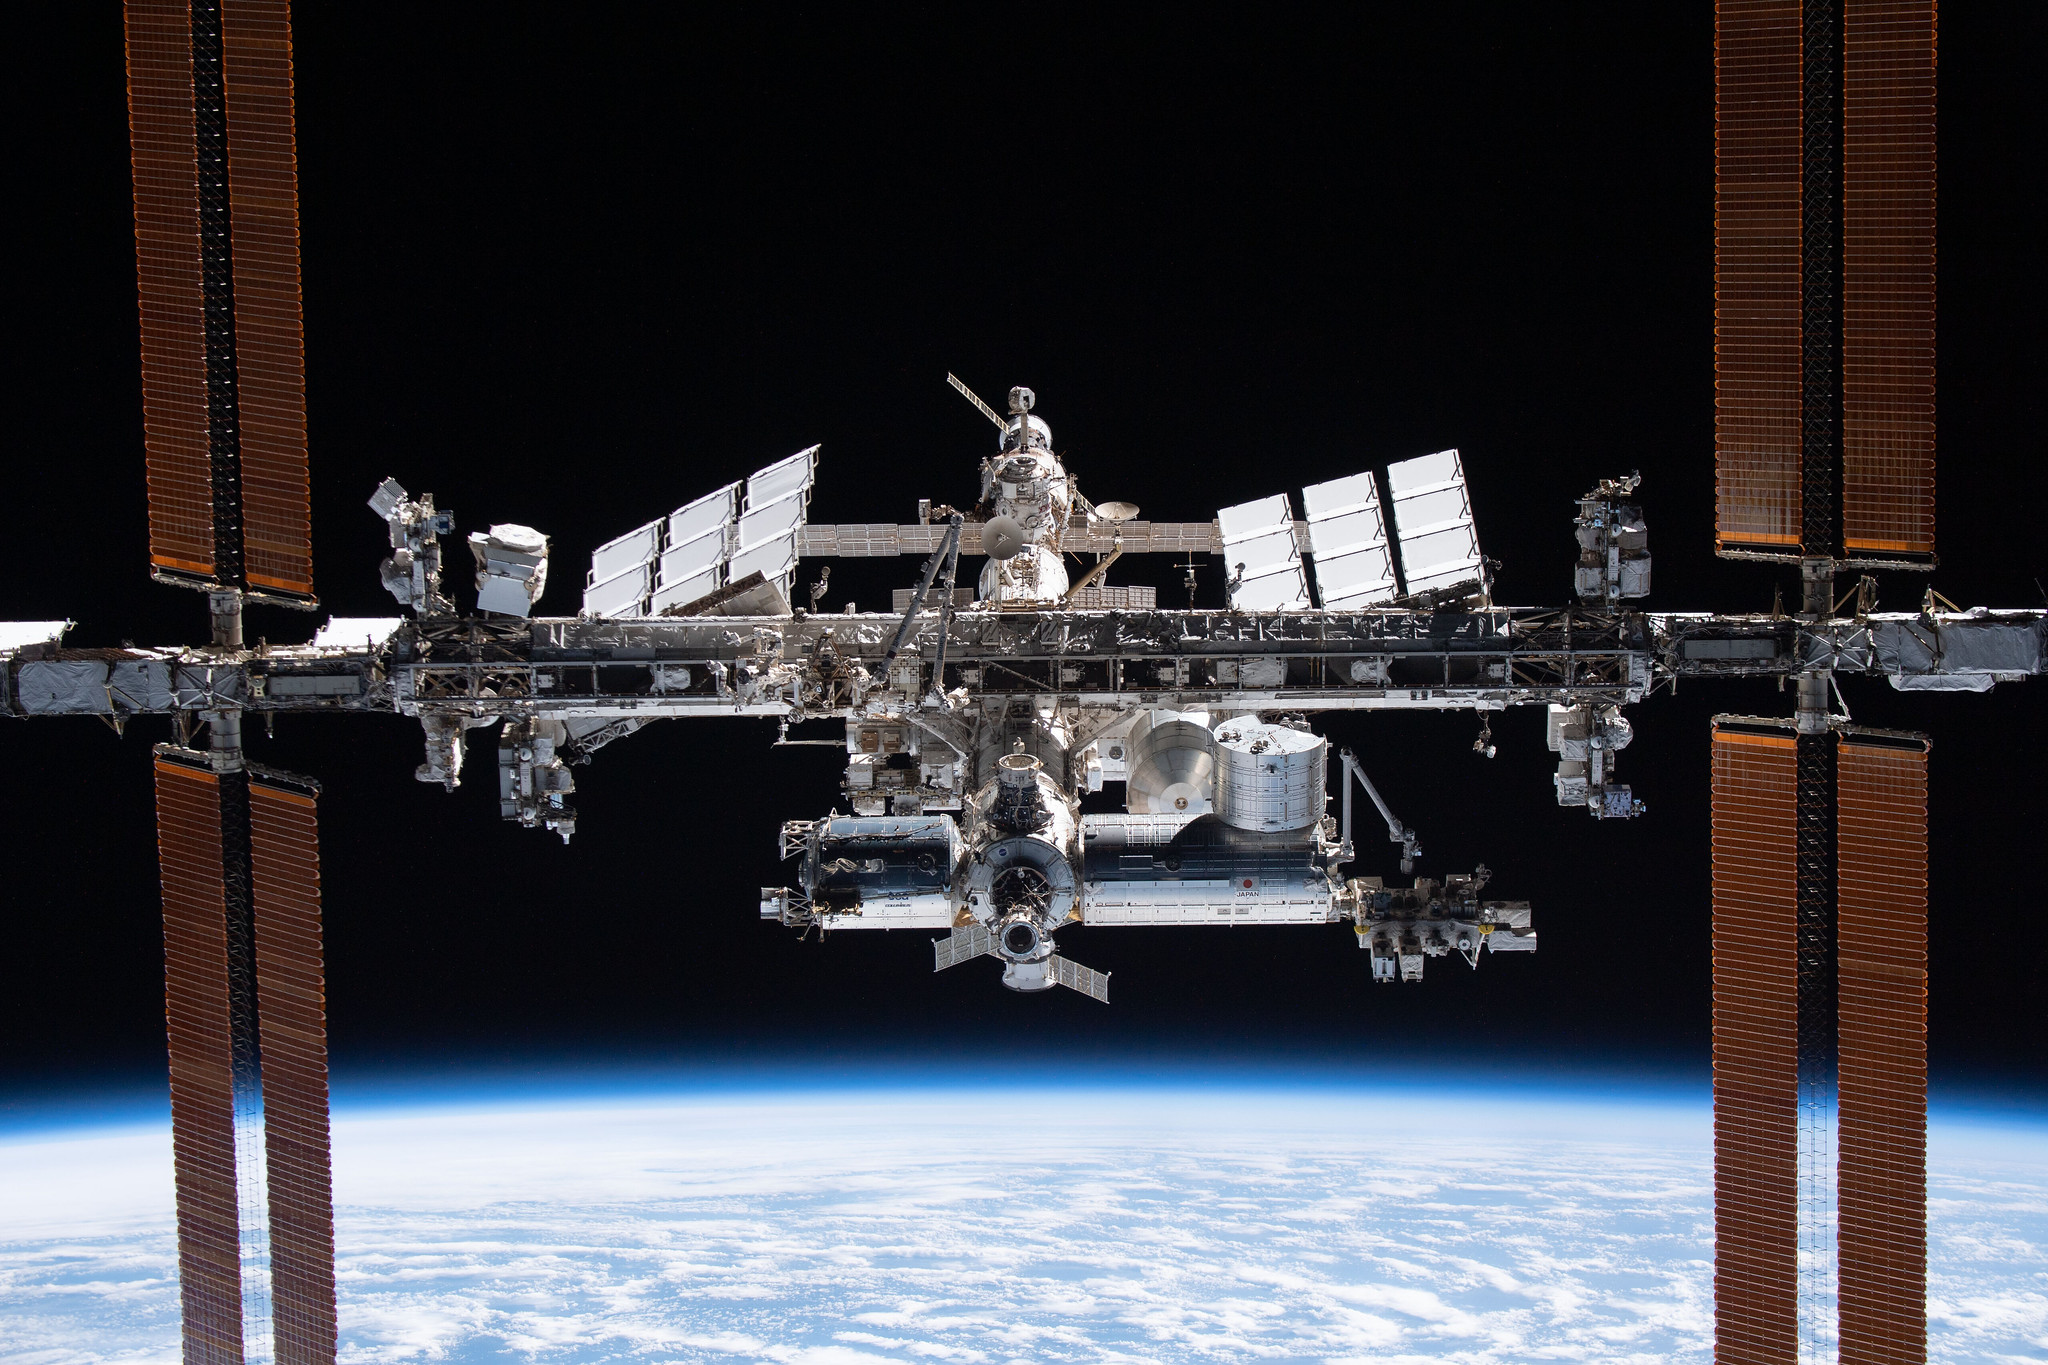 image of the space station flying over Earth